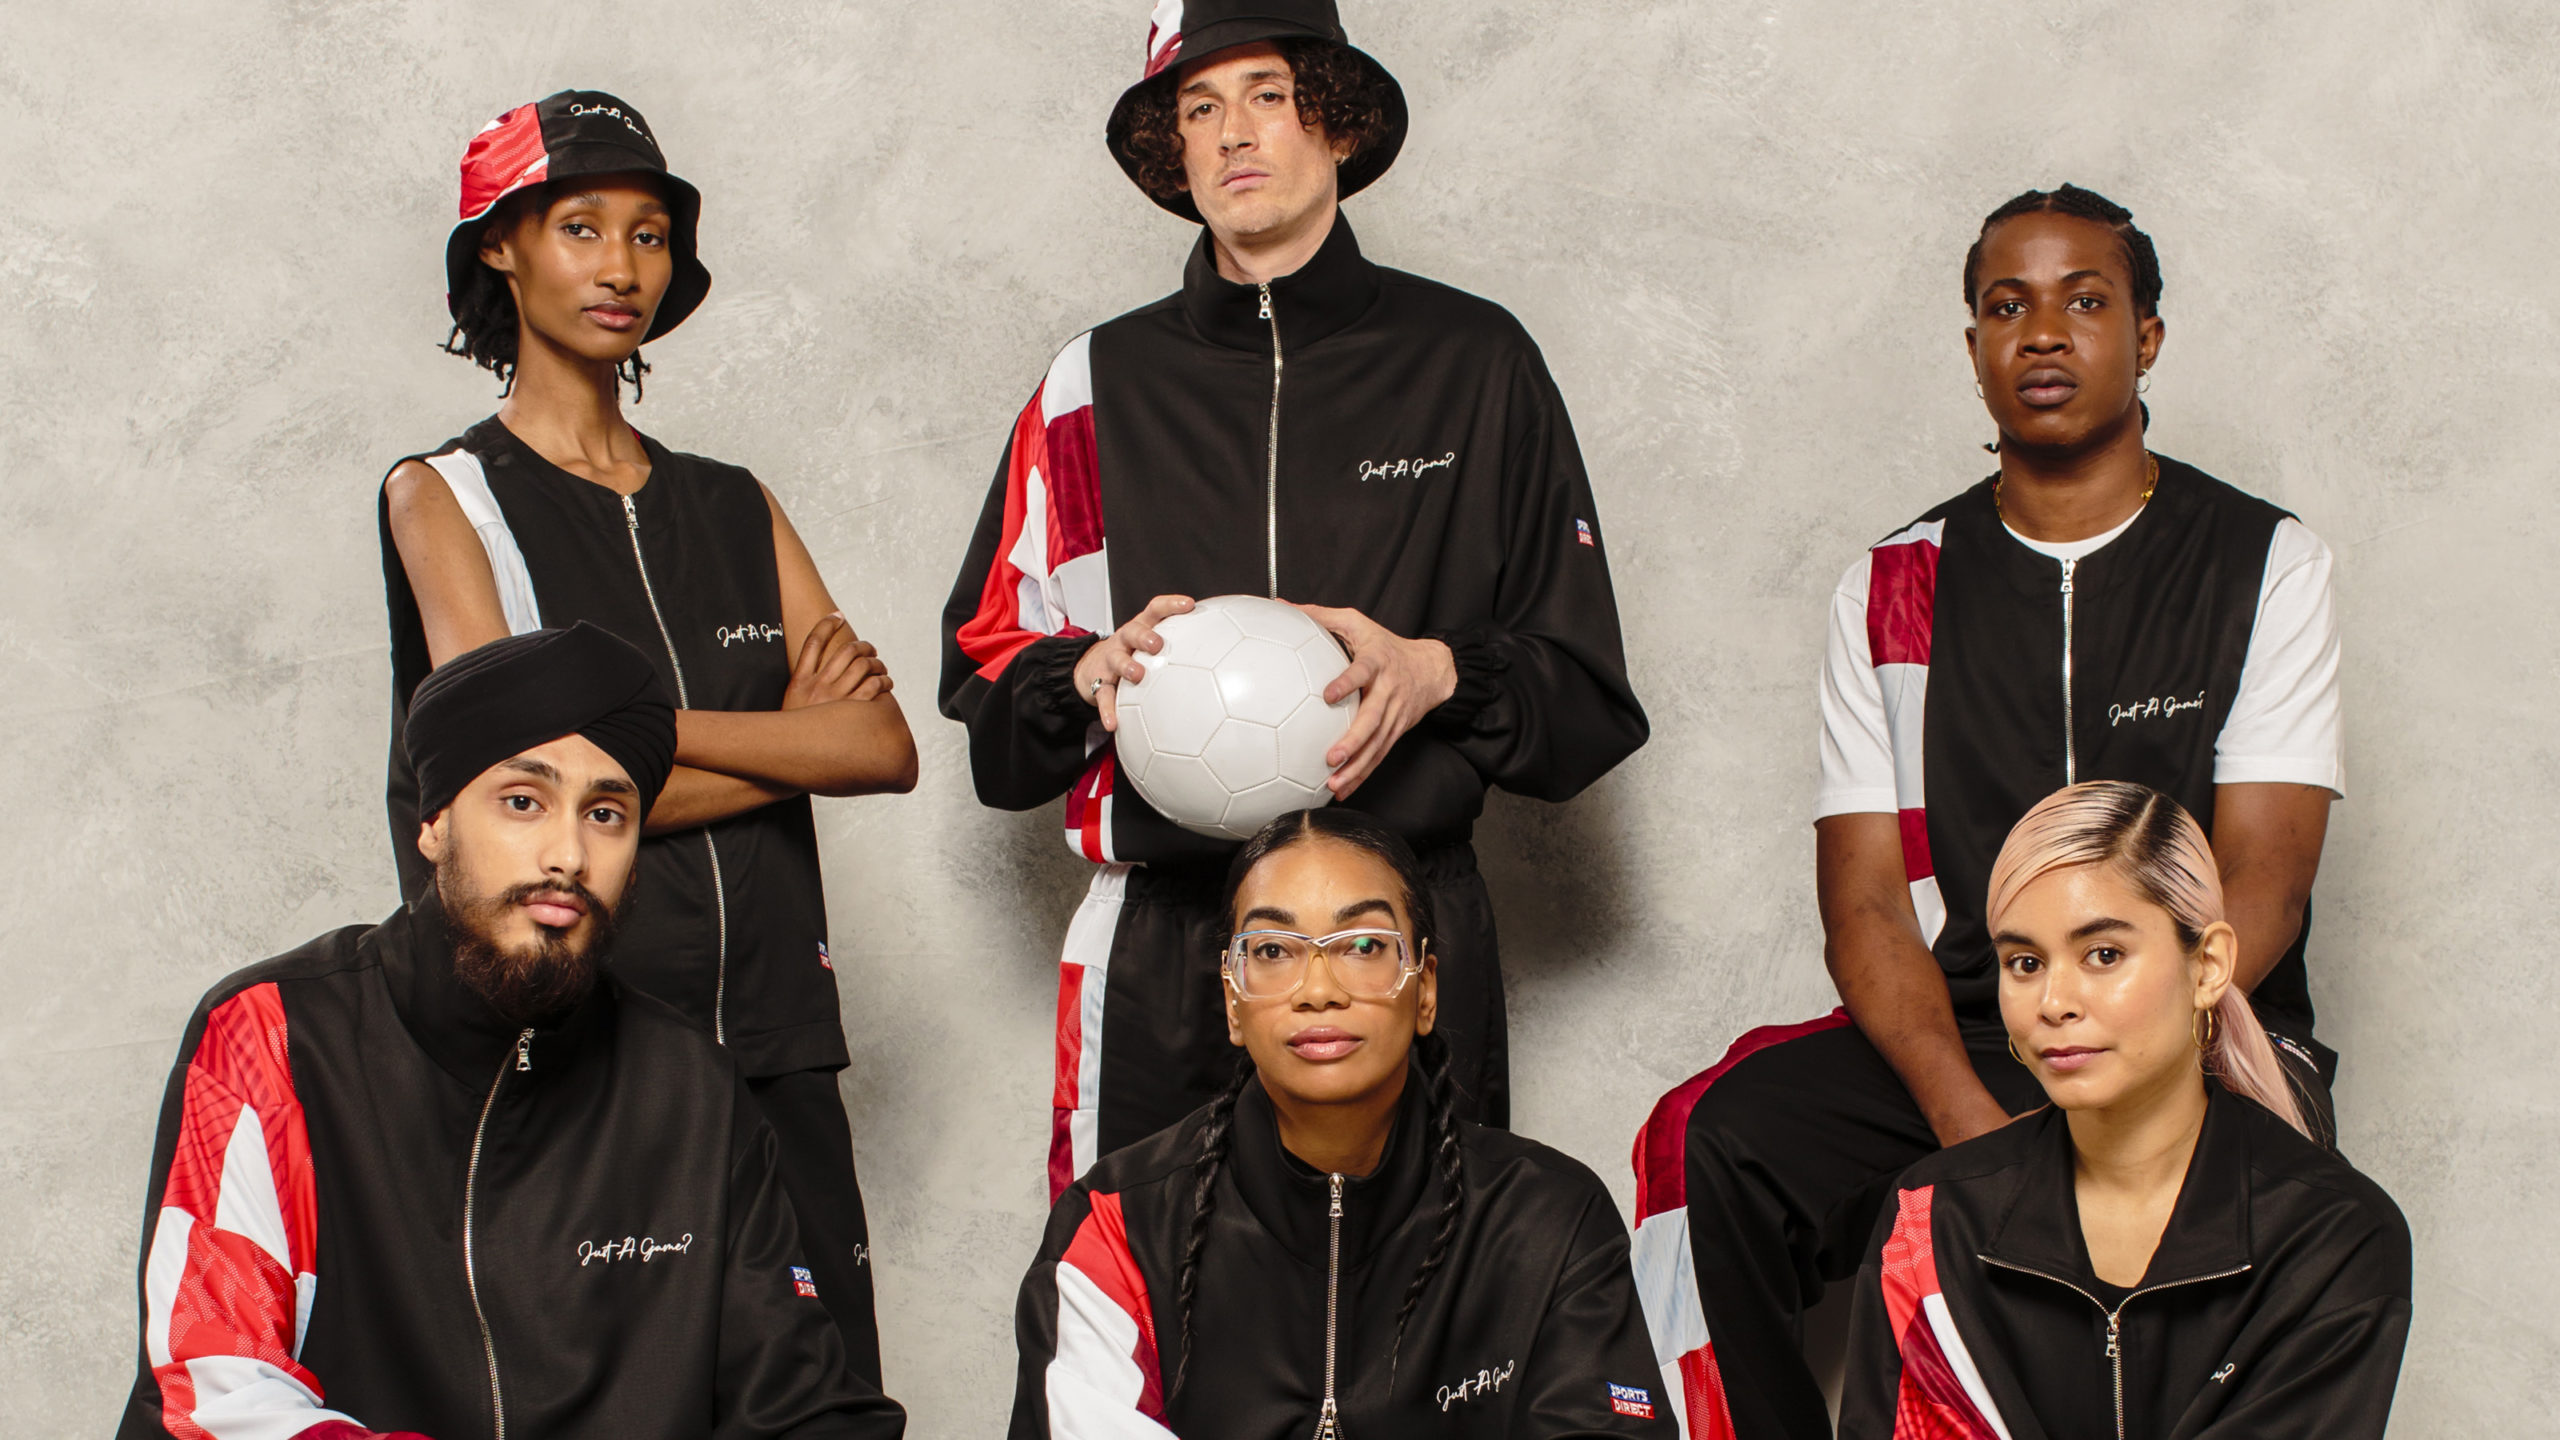 clothsurgeon are set to kick the Euros off with capsule collection in collaboration with Sports Direct